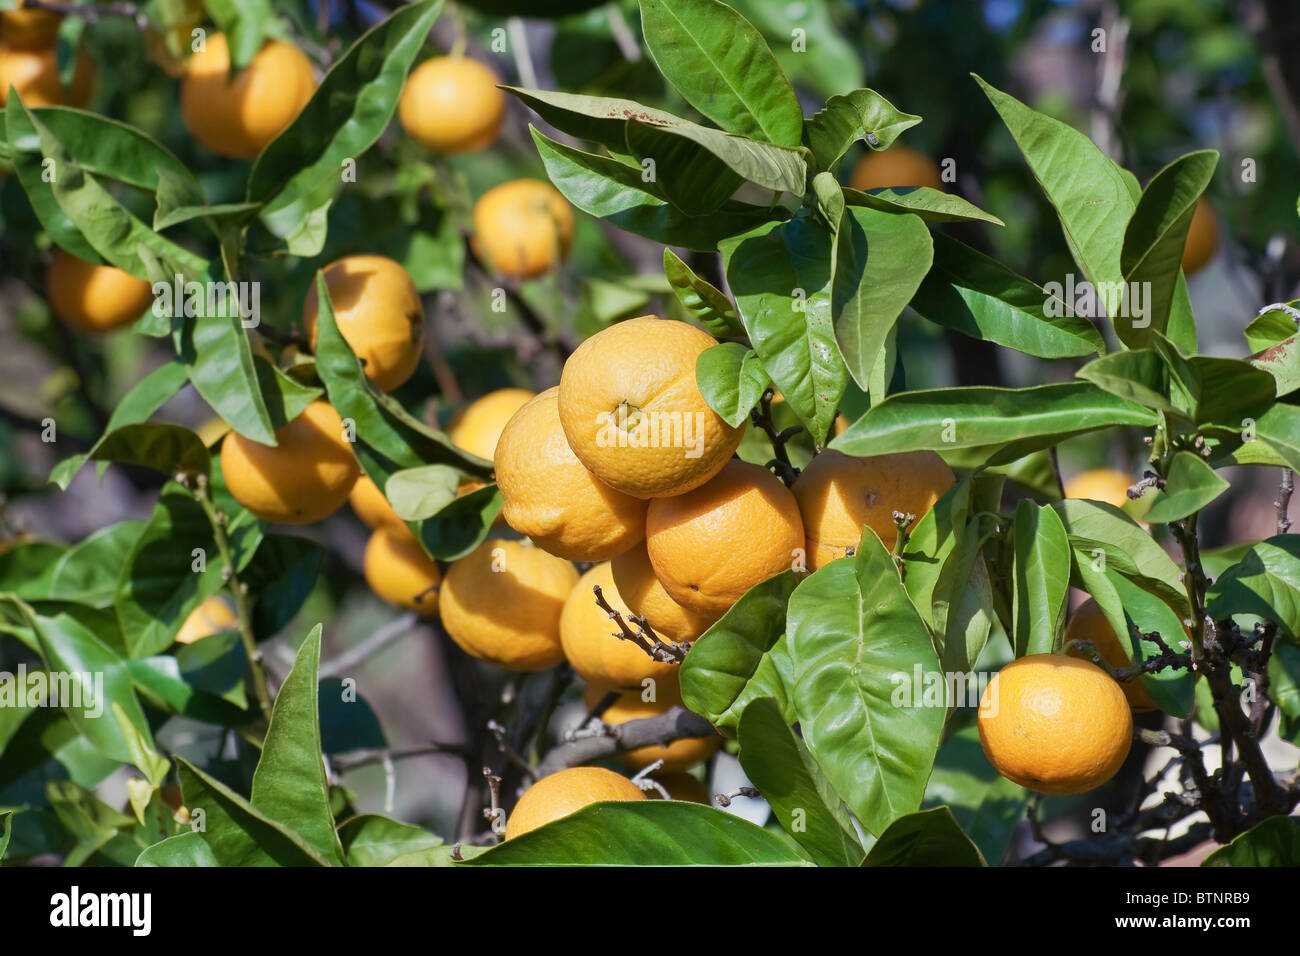 ripe oranges are hanging on a tree Stock Photo